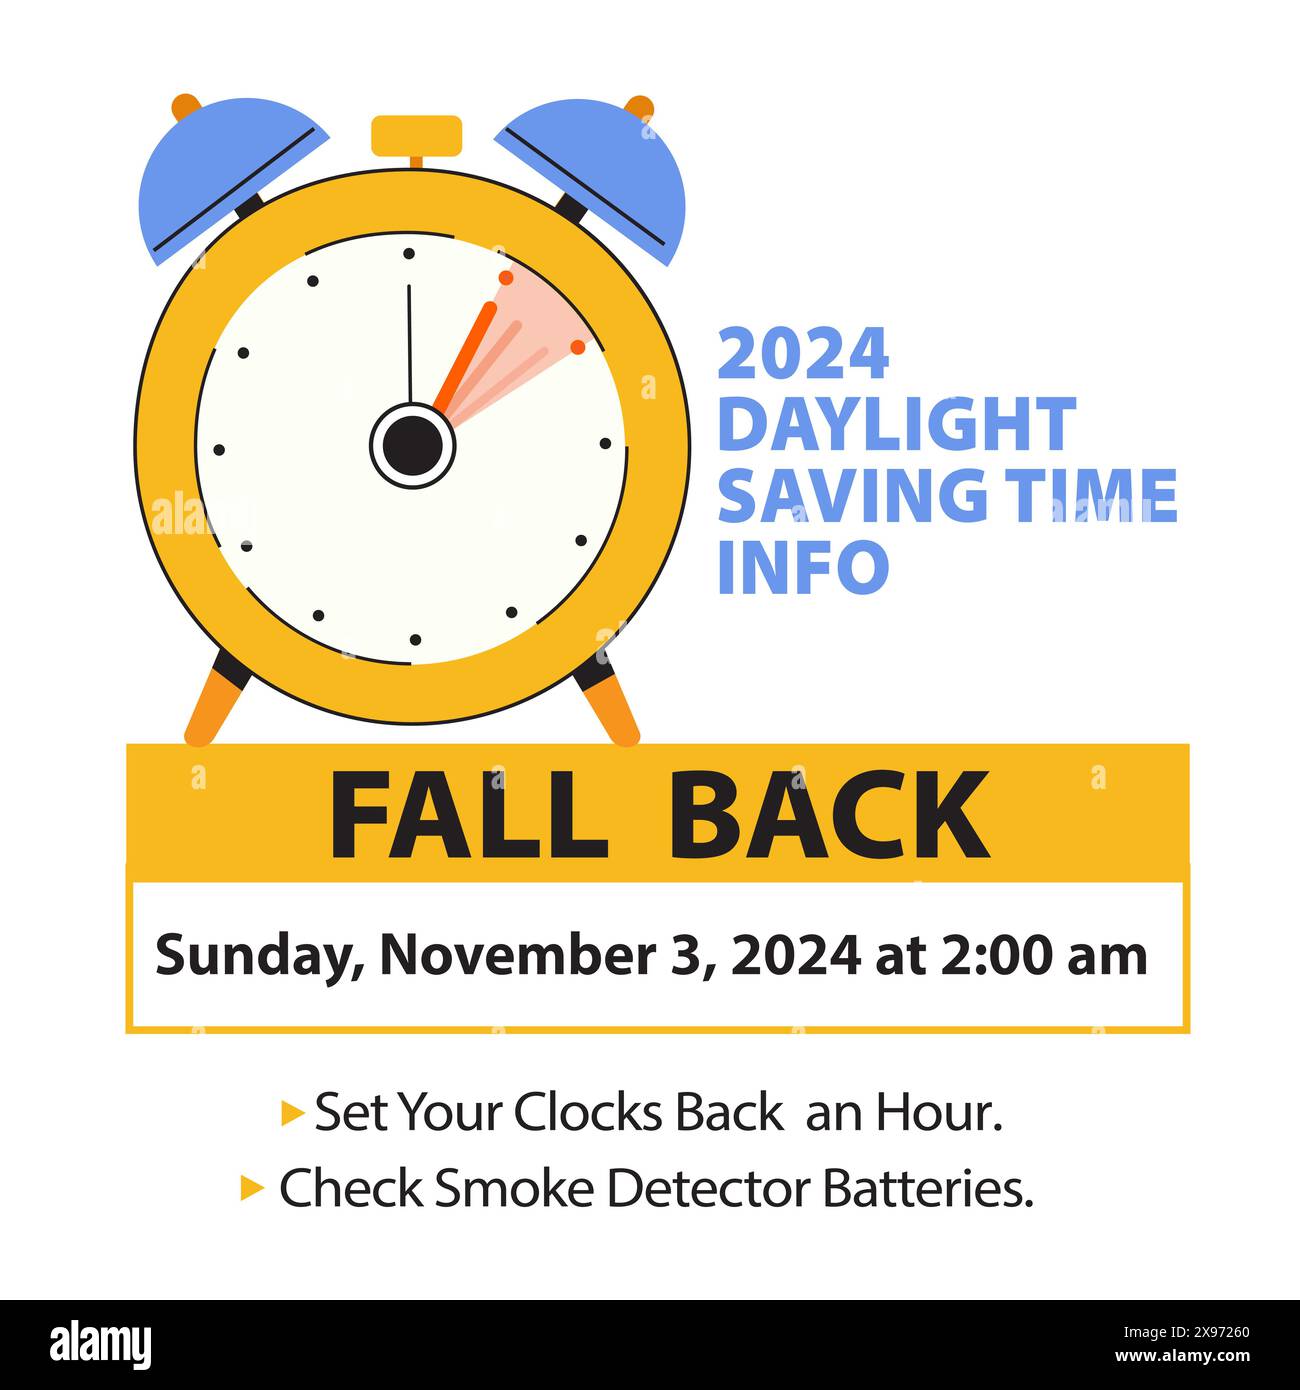 Daylight Saving Time Ends info schedule. Fall back Time in November 3, 2024 Web Banner with reminder text - Set Clocks back and Check Smoke Detector B Stock Vector